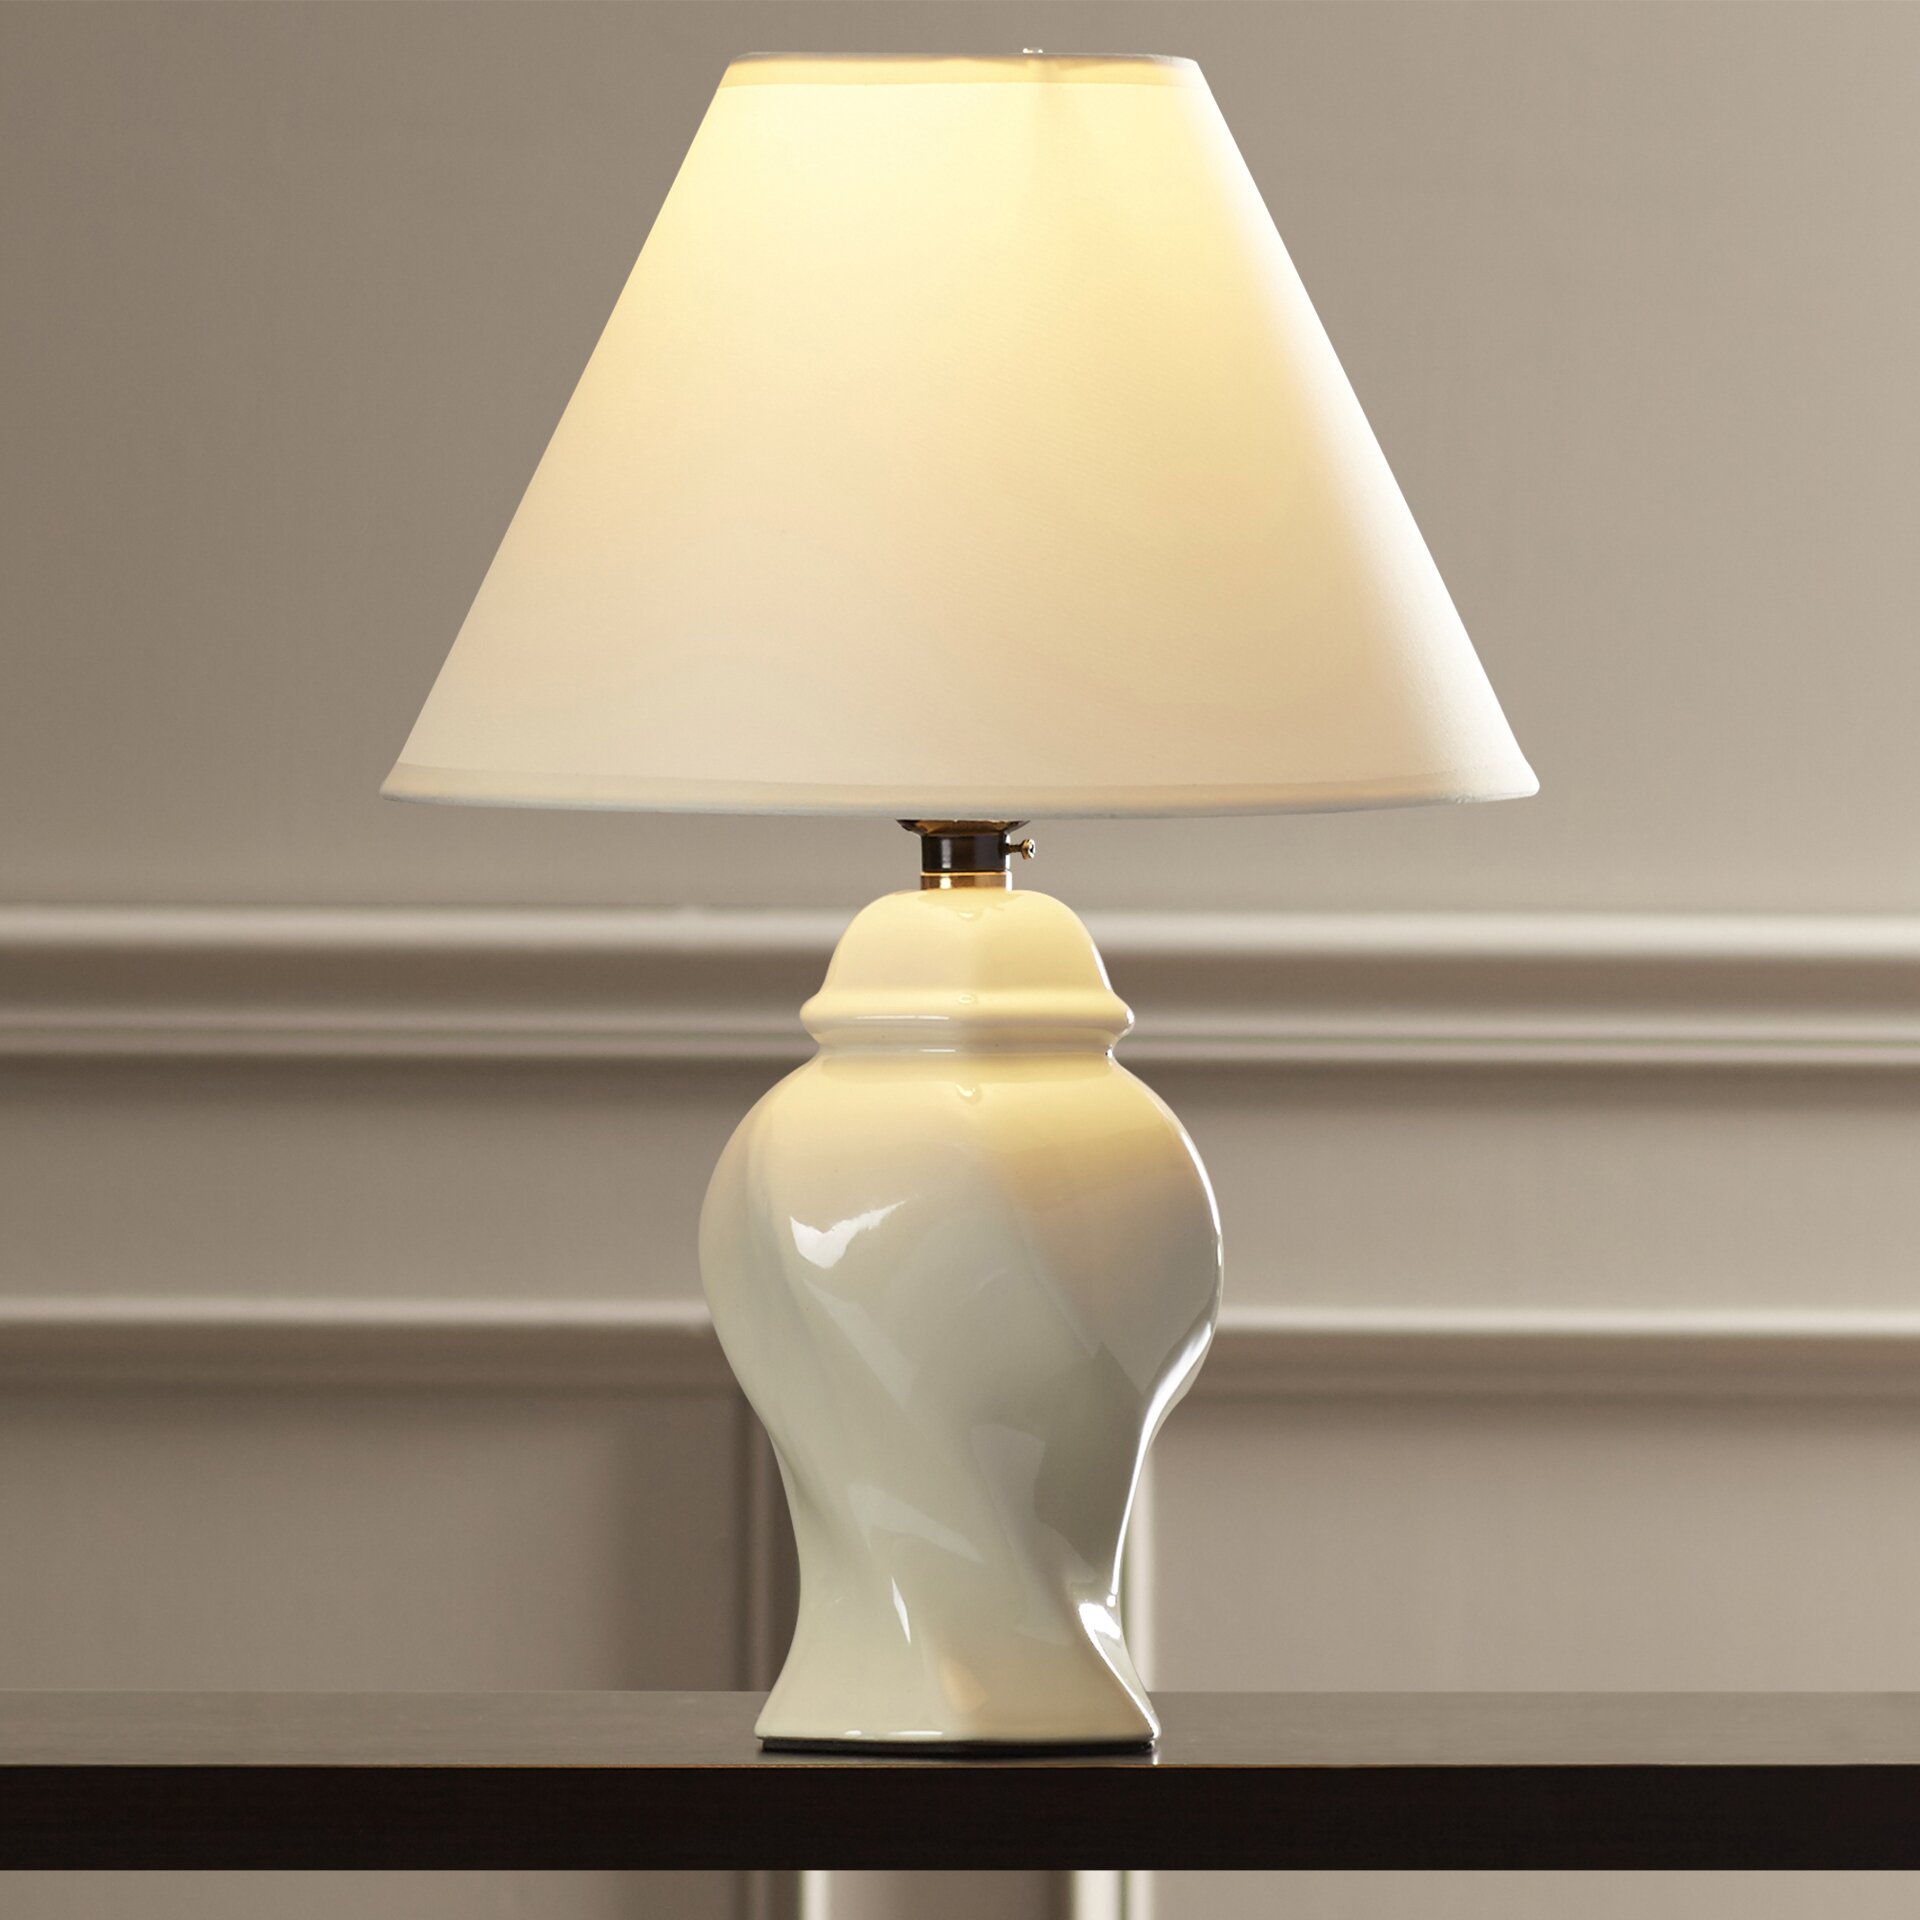 How High Should A Bedroom Table Lamp Be(42).jpg